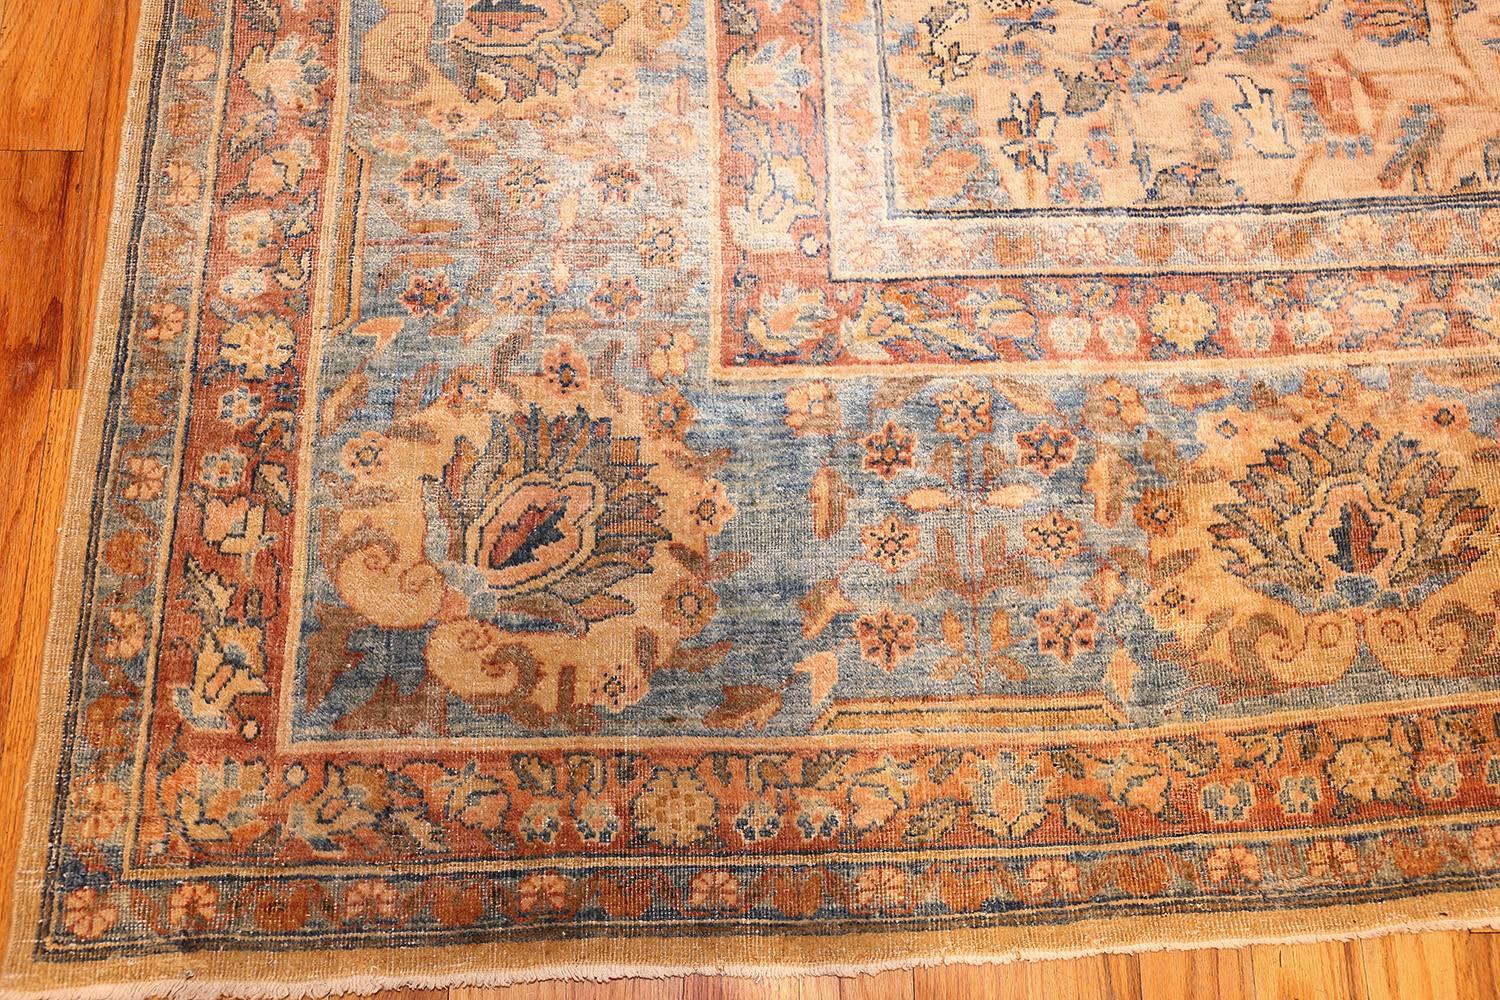 Wool Decorative and Rare Square Size Persian Antique Tabriz Rug. Size: 14' x 14' 6